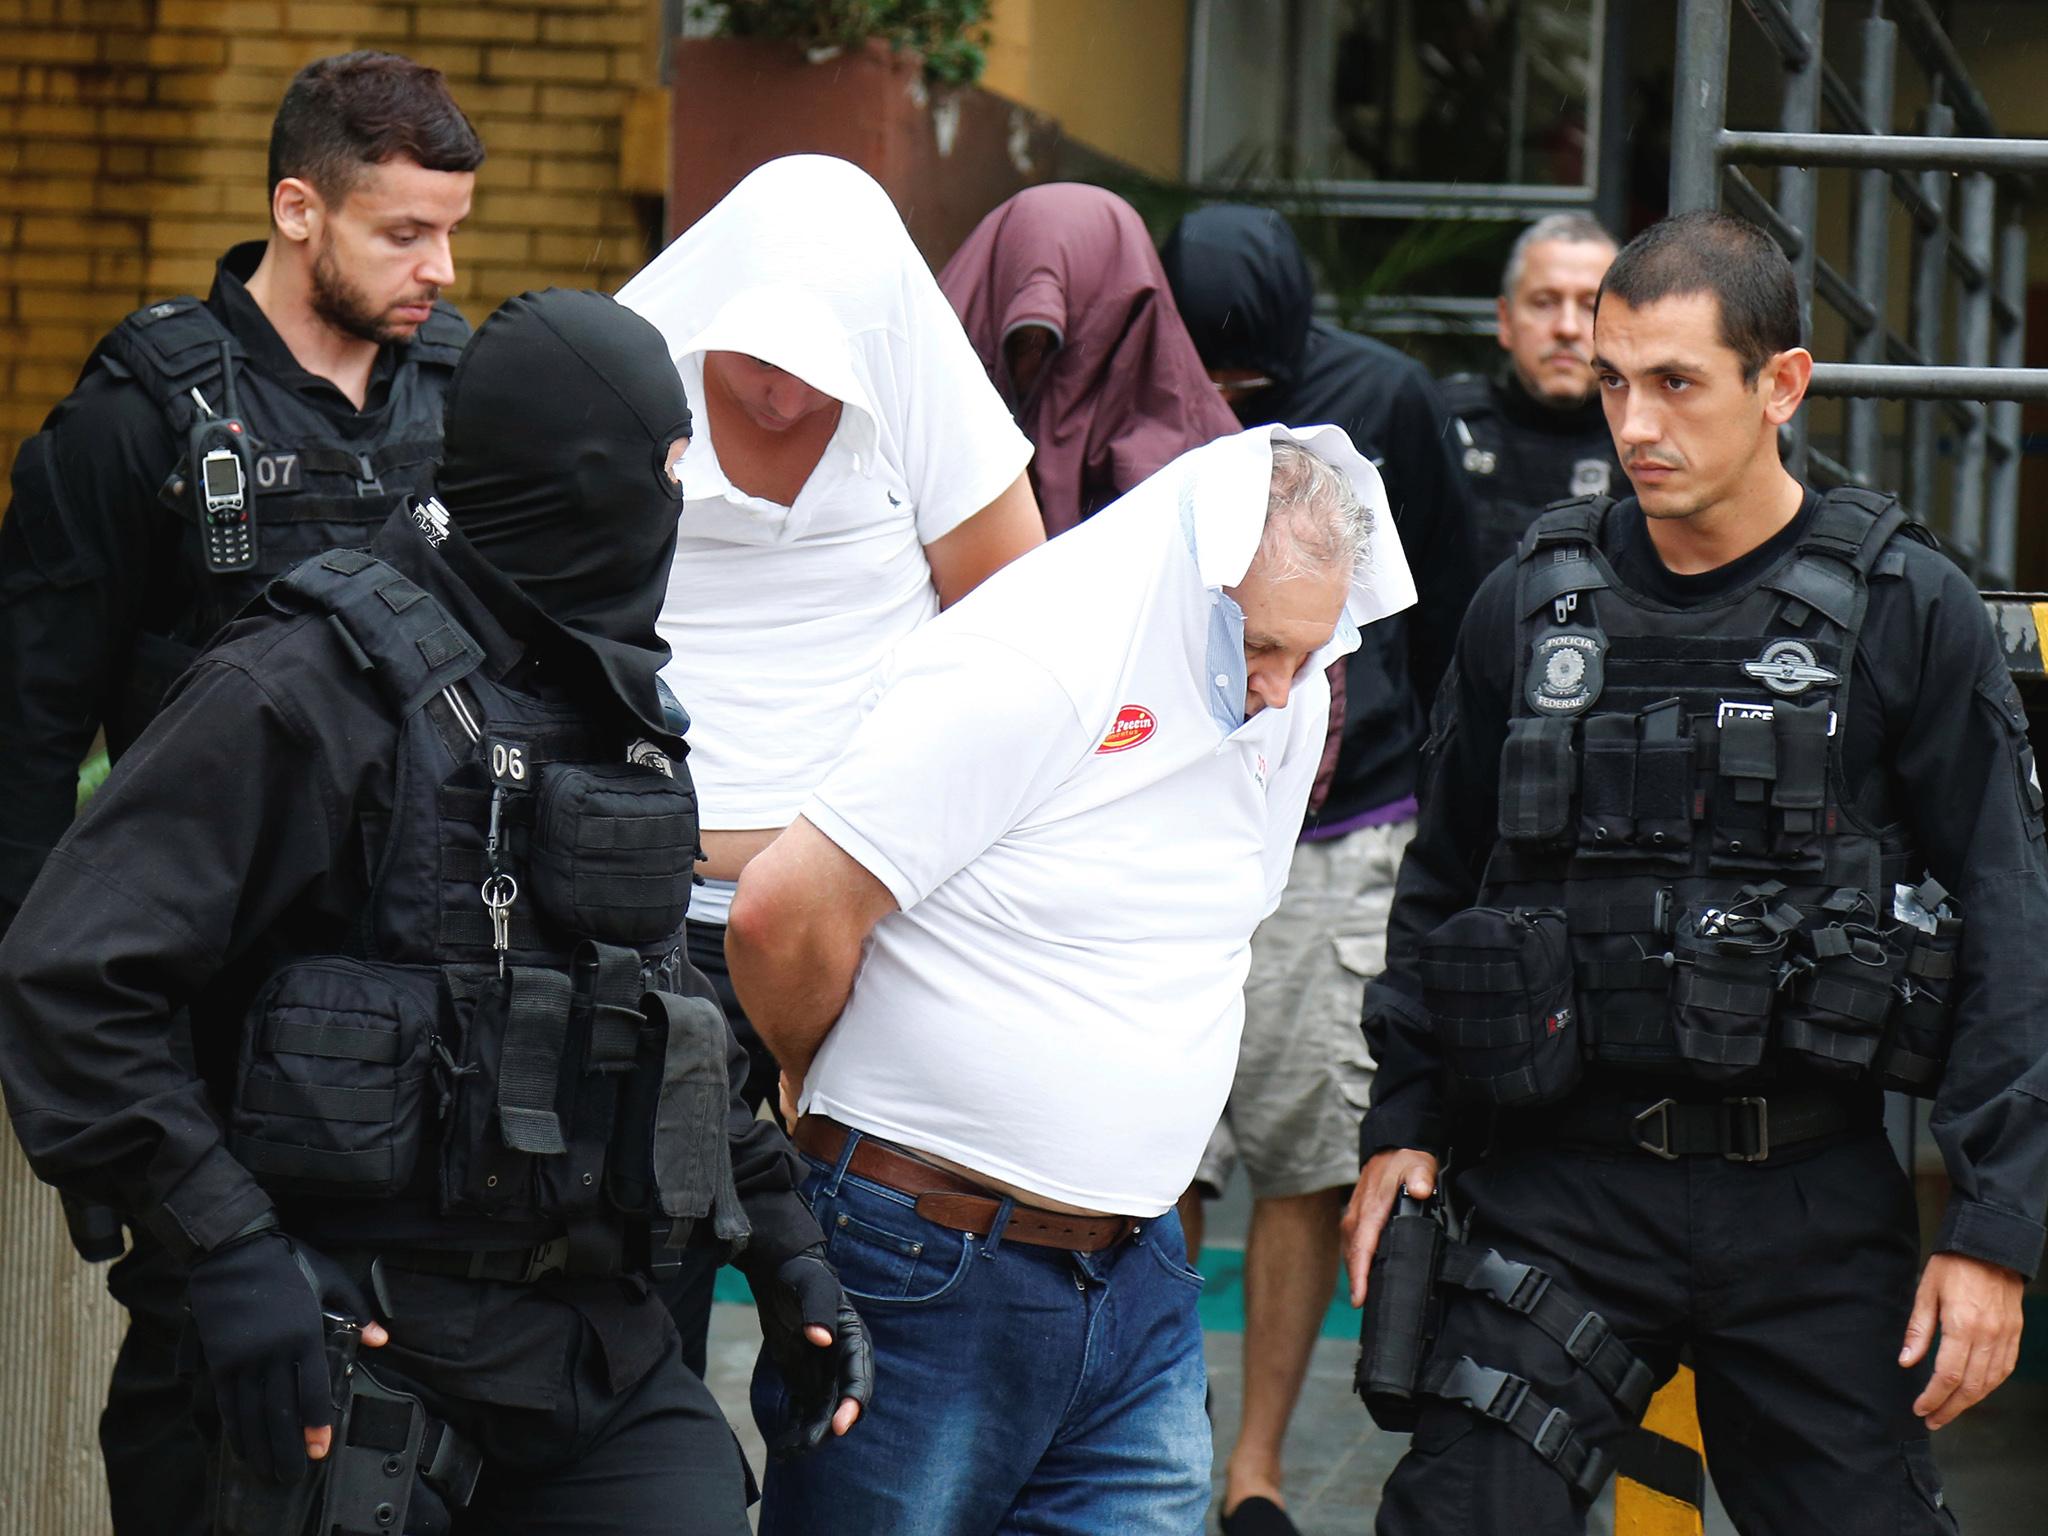 People detained during the probe known as "Operation Weak Flesh" are escorted by the police as they leave the Institute of Forensic Science in Curitiba, Brazil